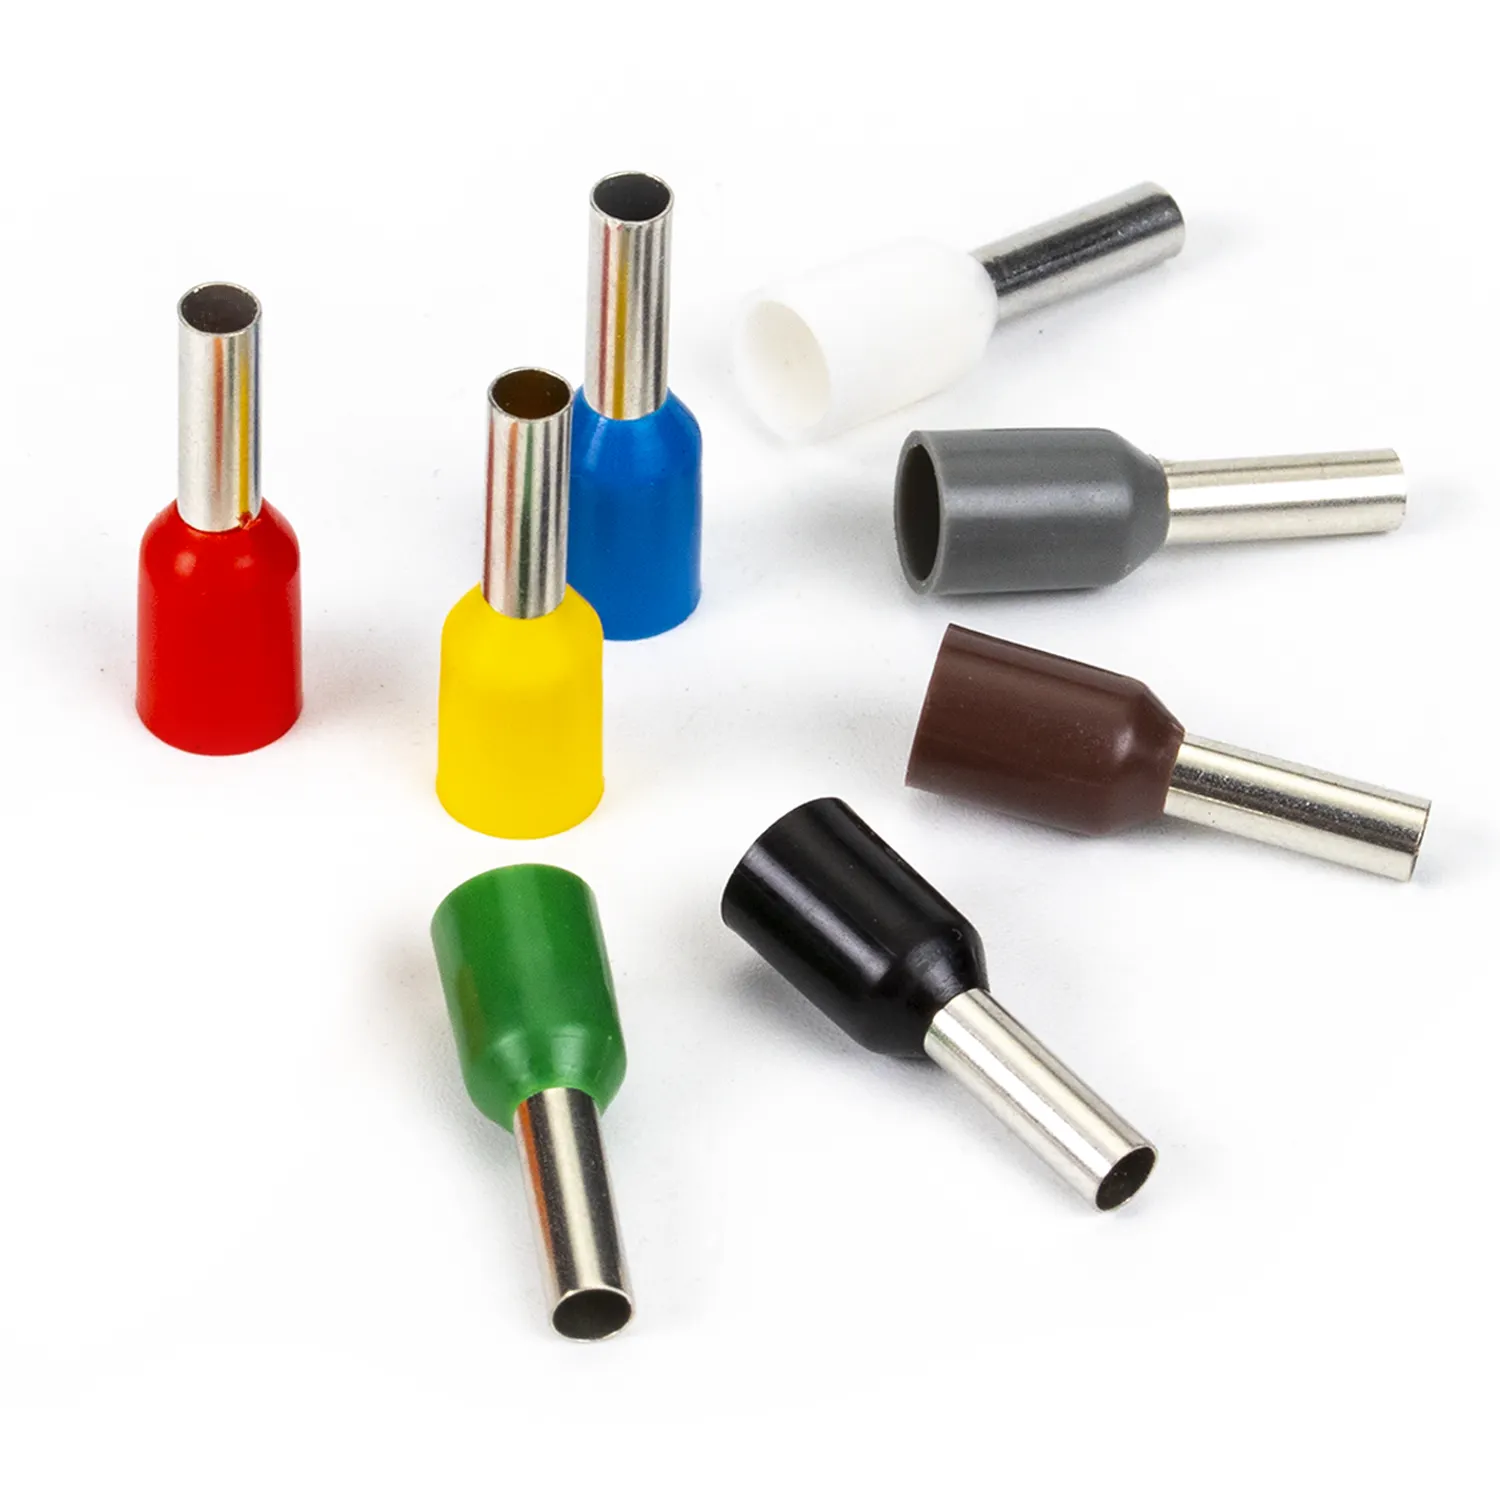 VE series insulated cord end terminal tube cable bootlace ferrule pre-insulated wire connector needle crimp terminal